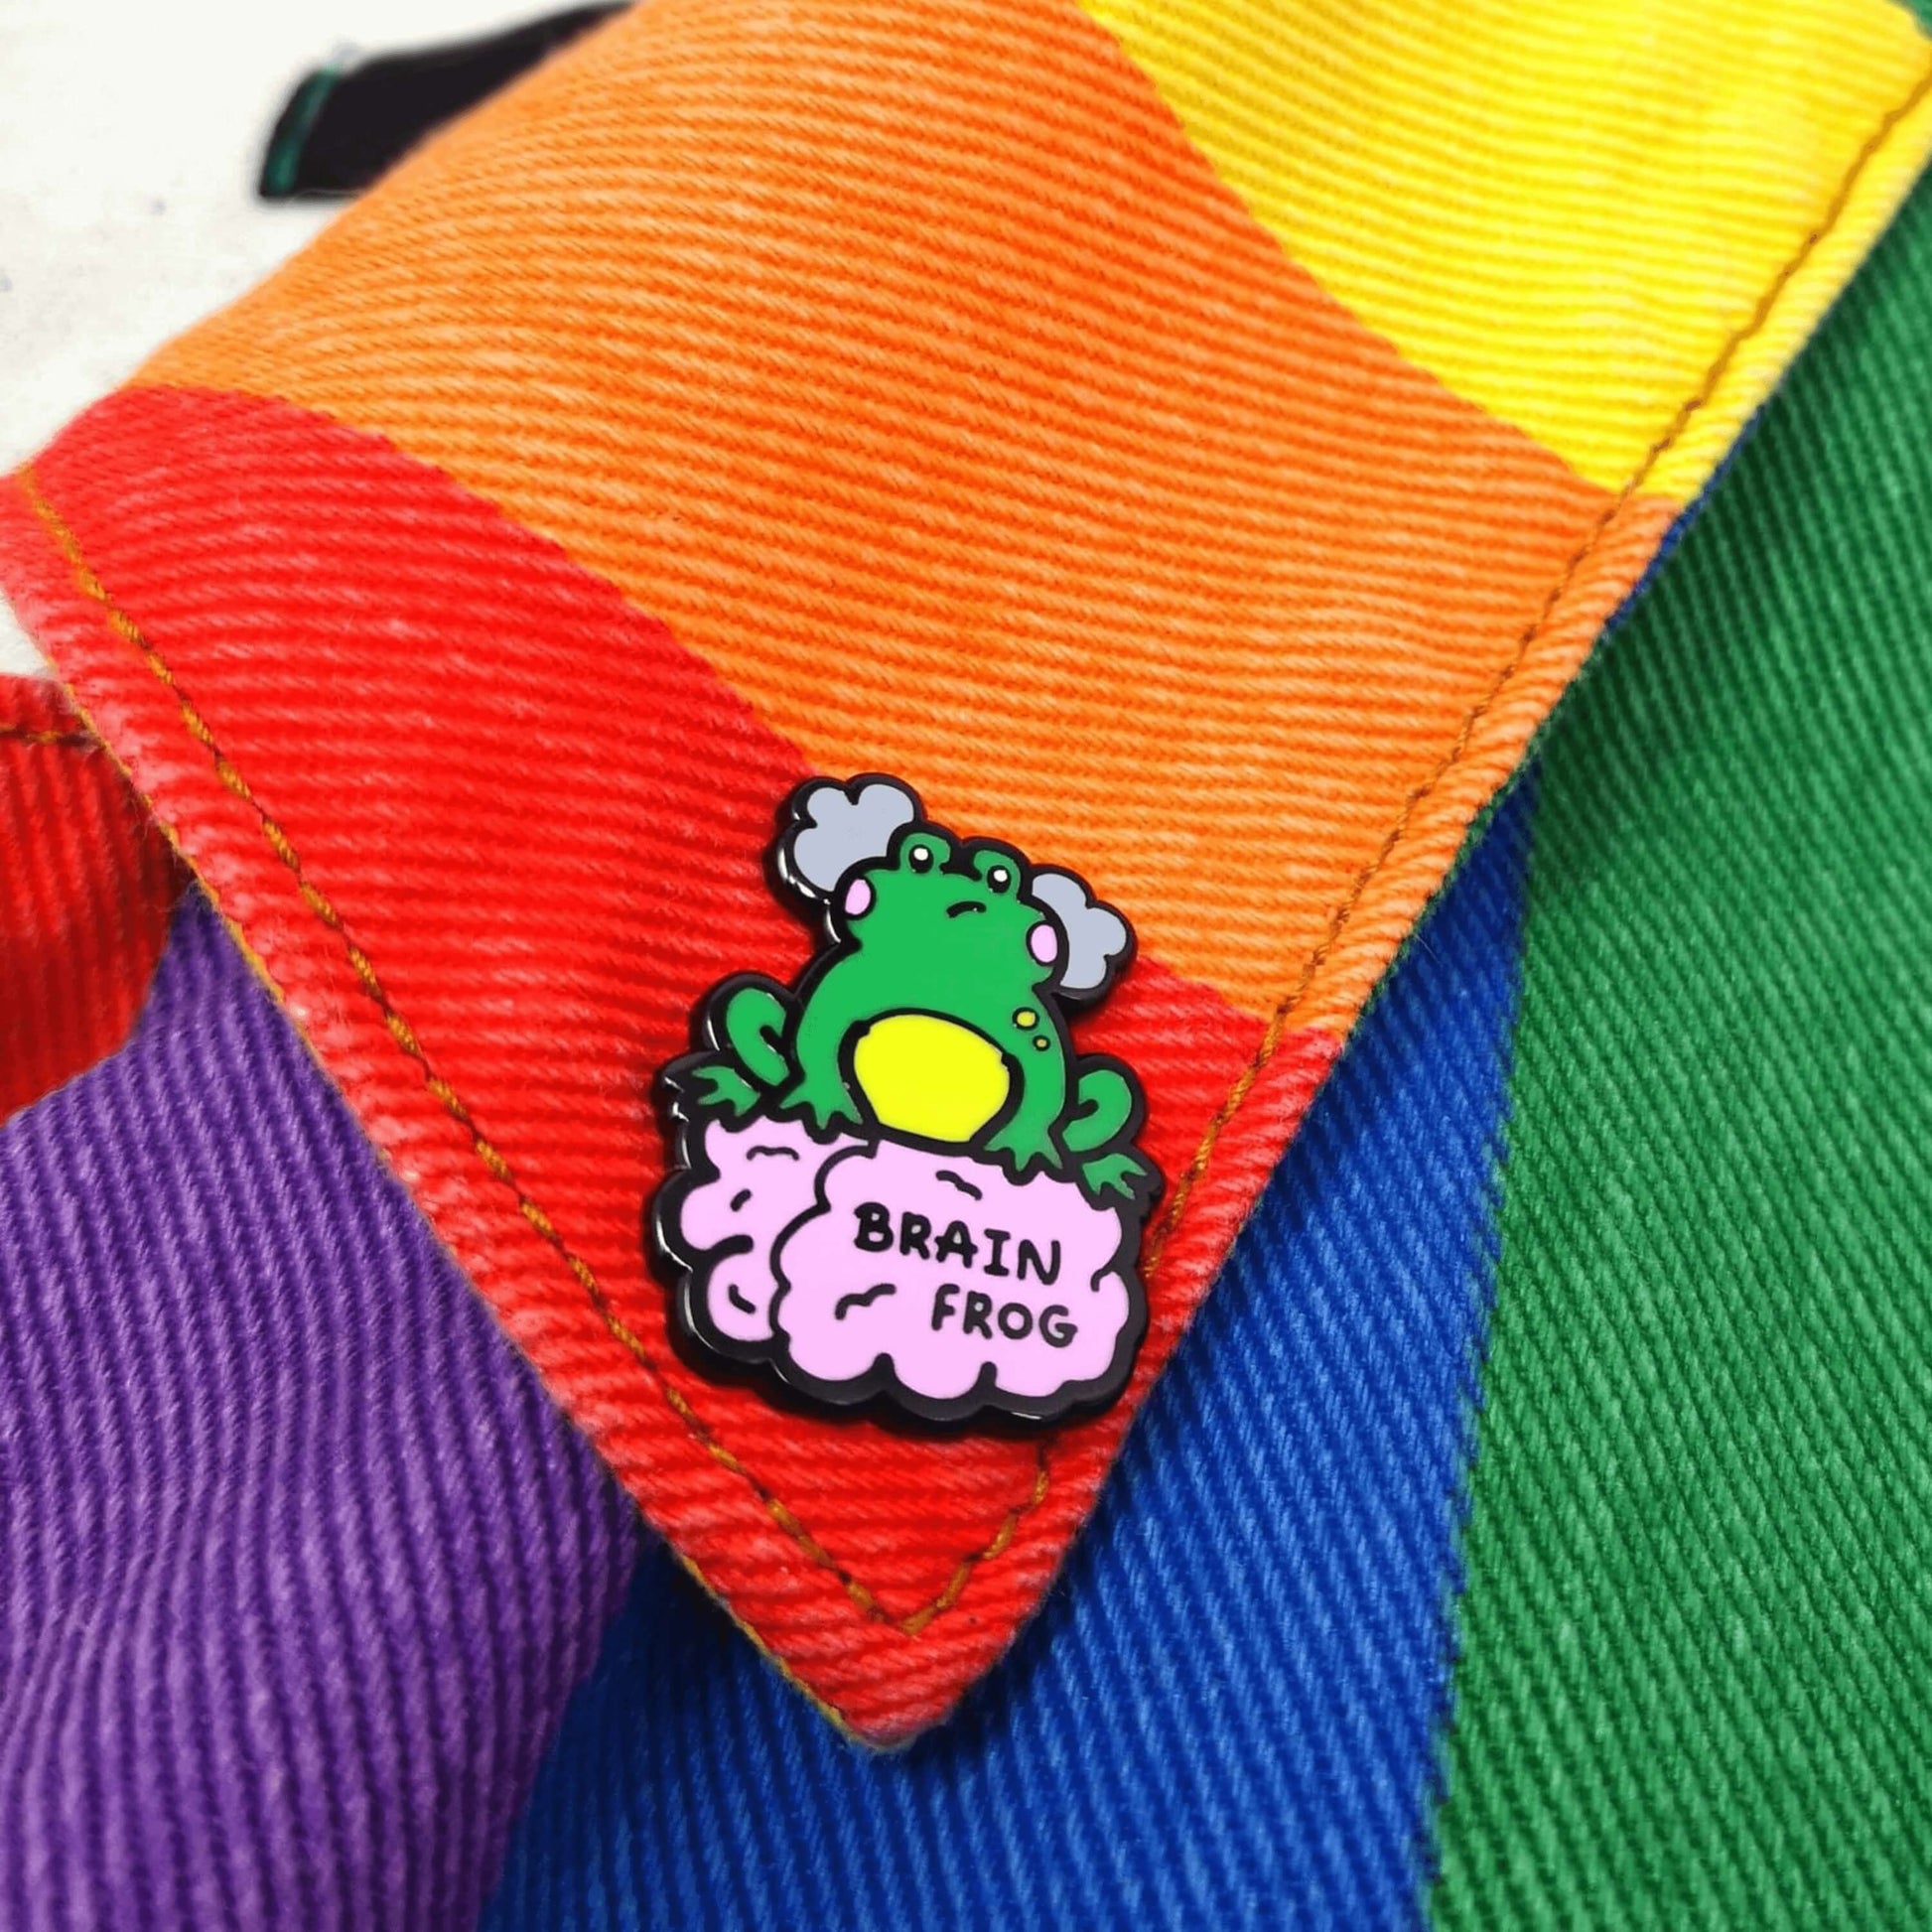 The Brain Frog Enamel Pin - Brain Fog on a rainbow denim jacket collar. The pin is of a green frog with pink blush cheeks looking confused with two grey clouds by its head, it is sat on a pink brain with the text reading Brain Frog. The design is raising awareness for brain fog.